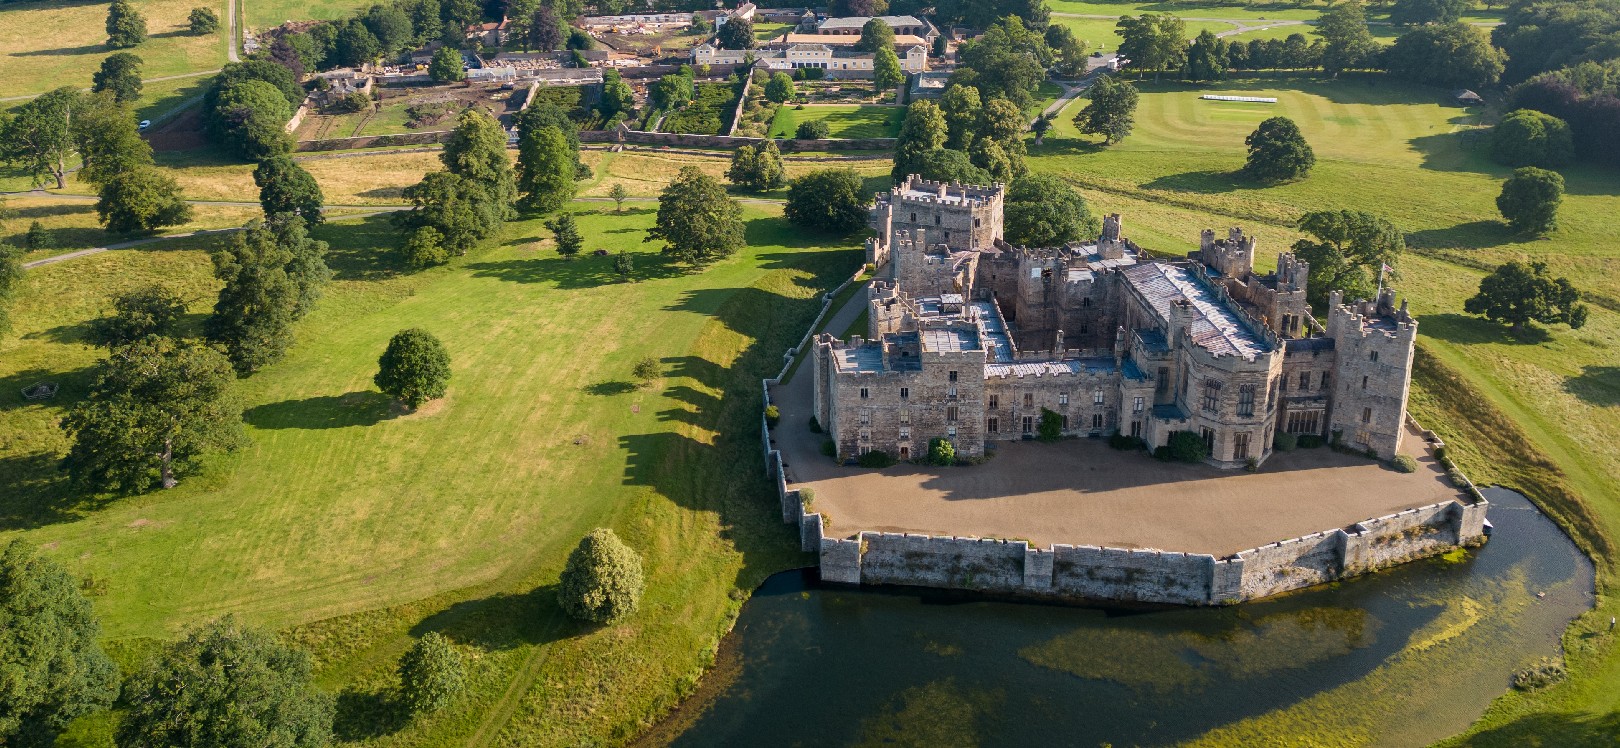 An image of Raby Castle taken from above